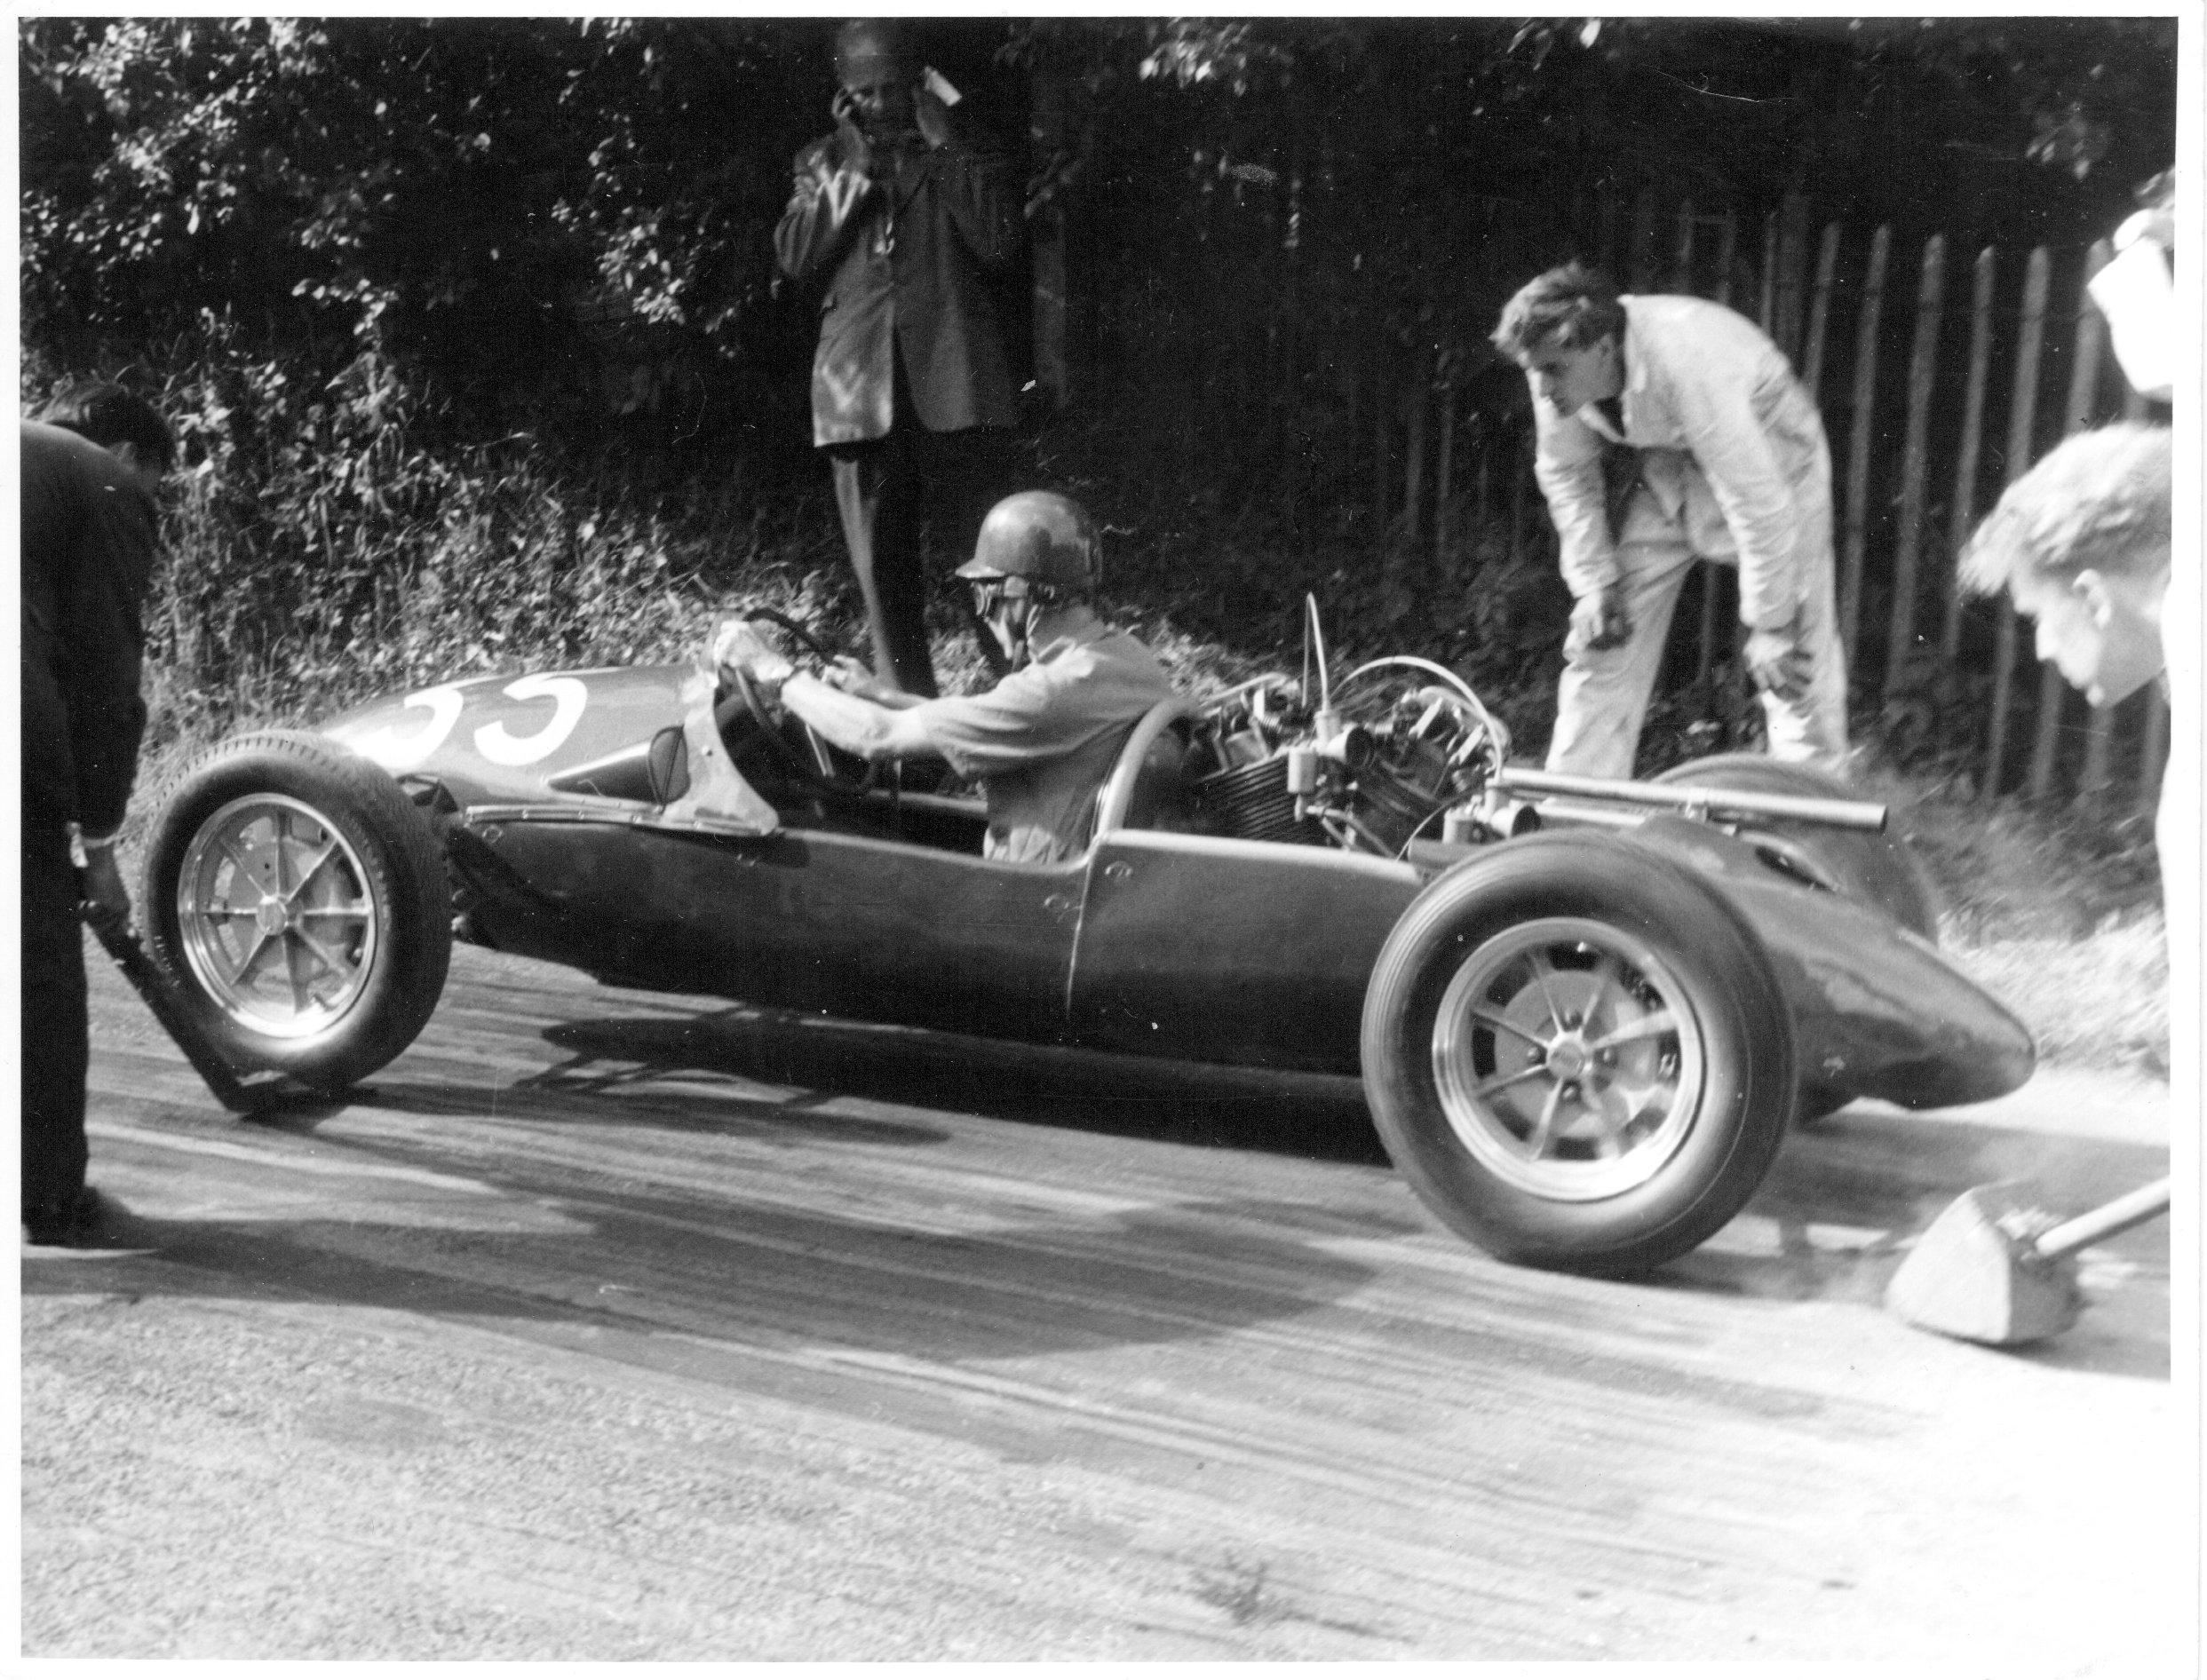 Mike Hatton, Shelsley Walsh, 12.6.60 or 11.6.61 photo by Photographic Craftsmen